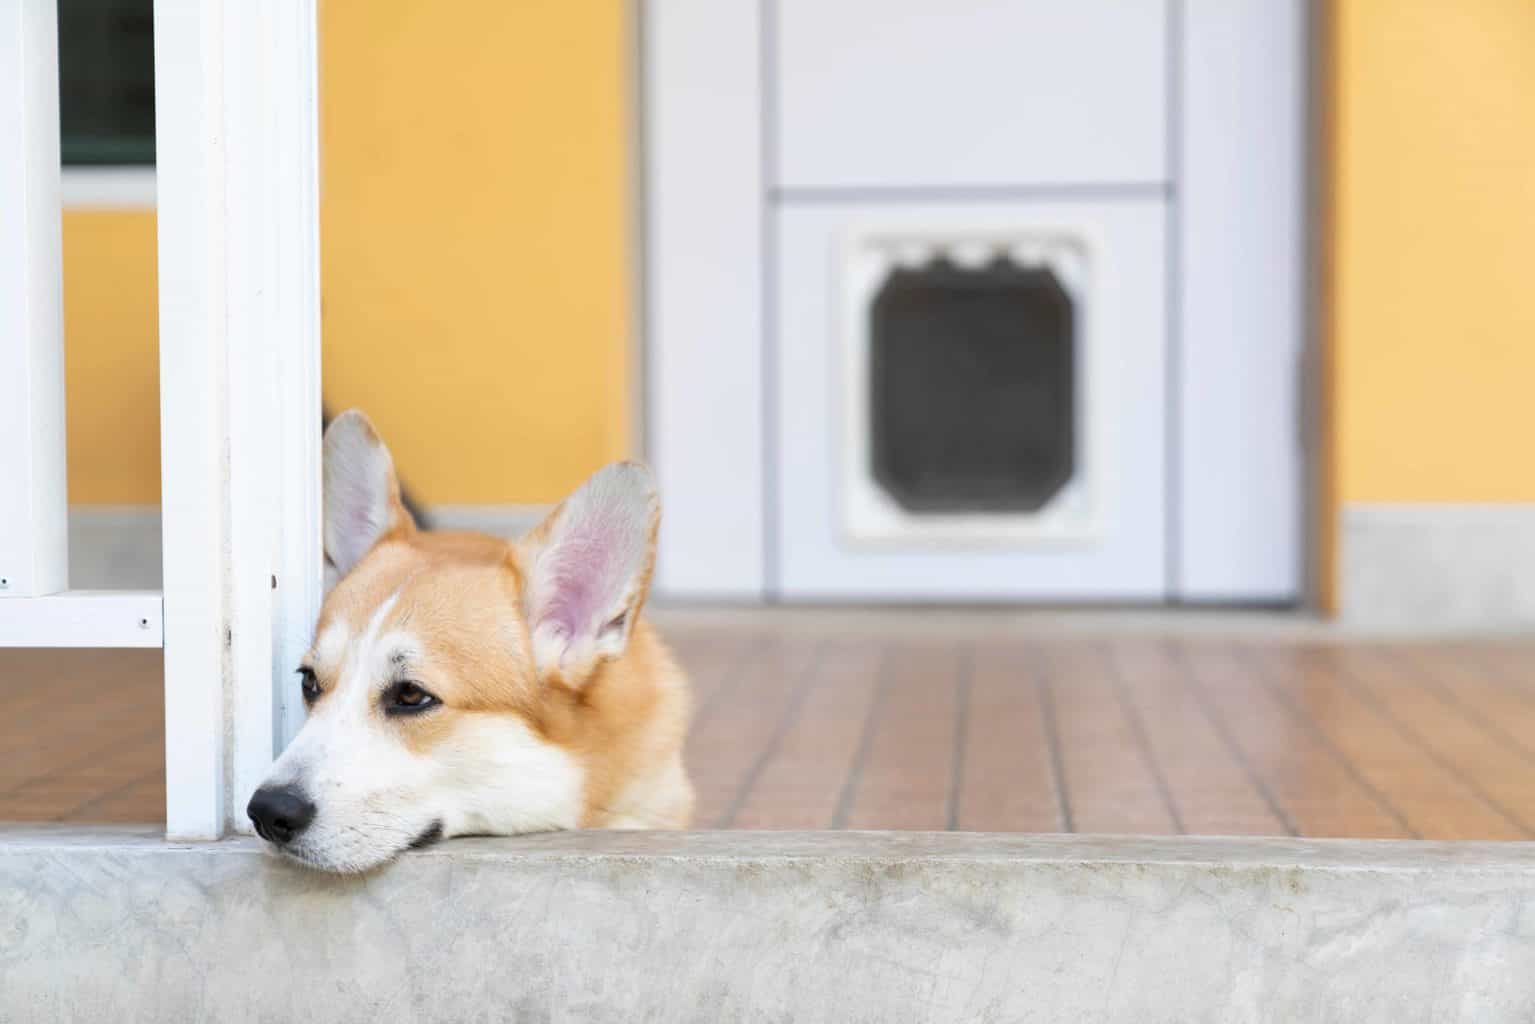 Corgi lounges outside house with dog door.